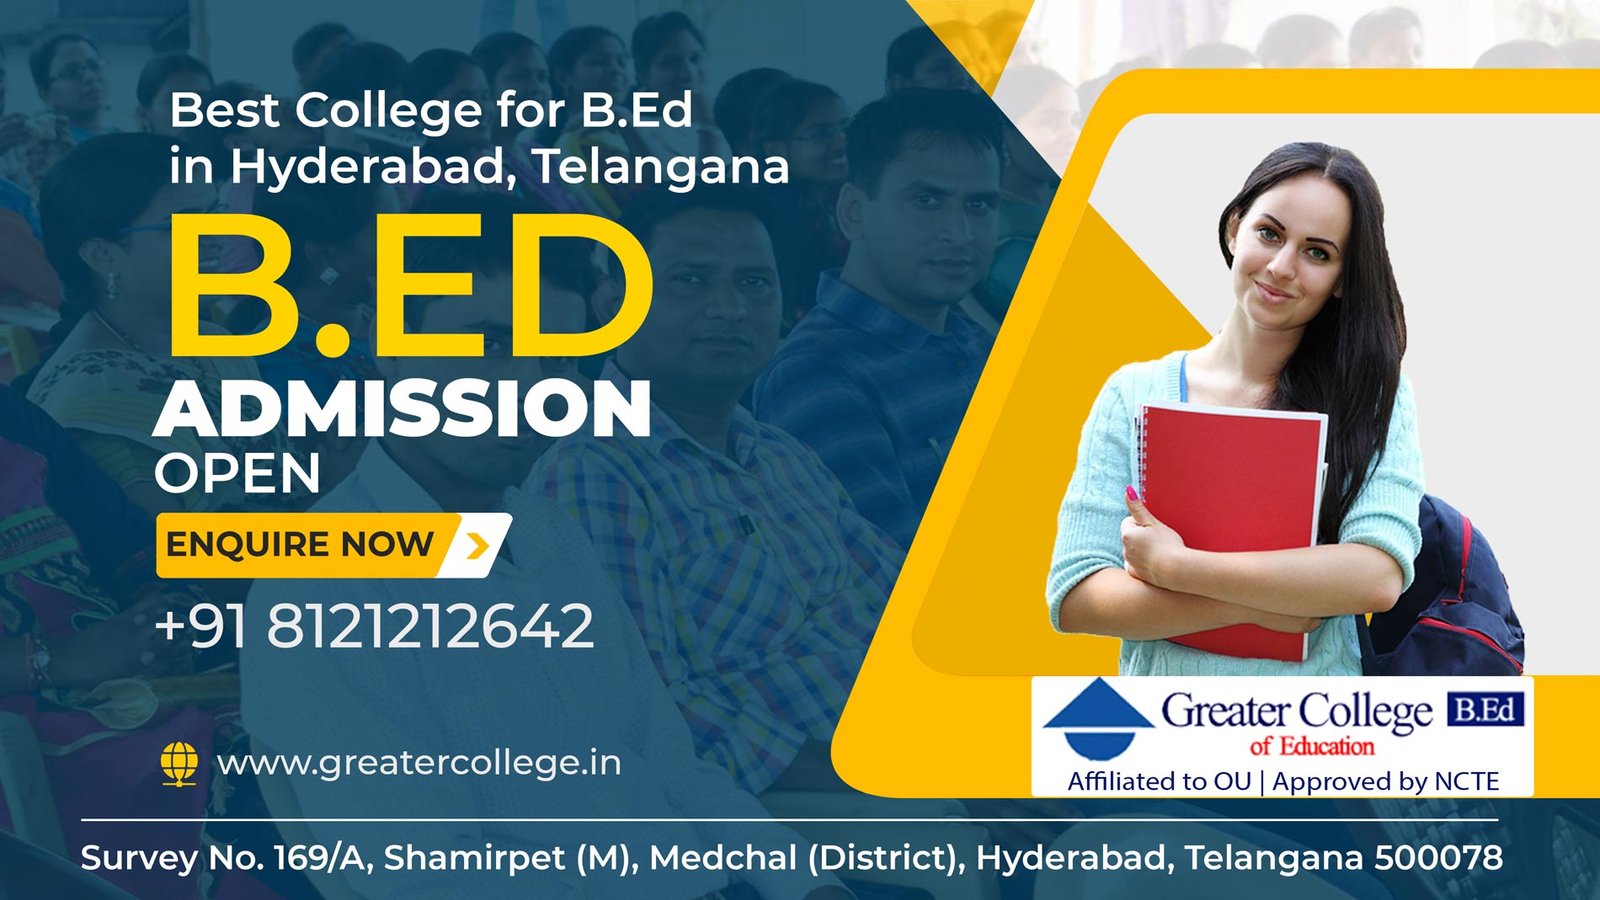 B.Ed Admission Open in Hyderabad at Greater College of Education